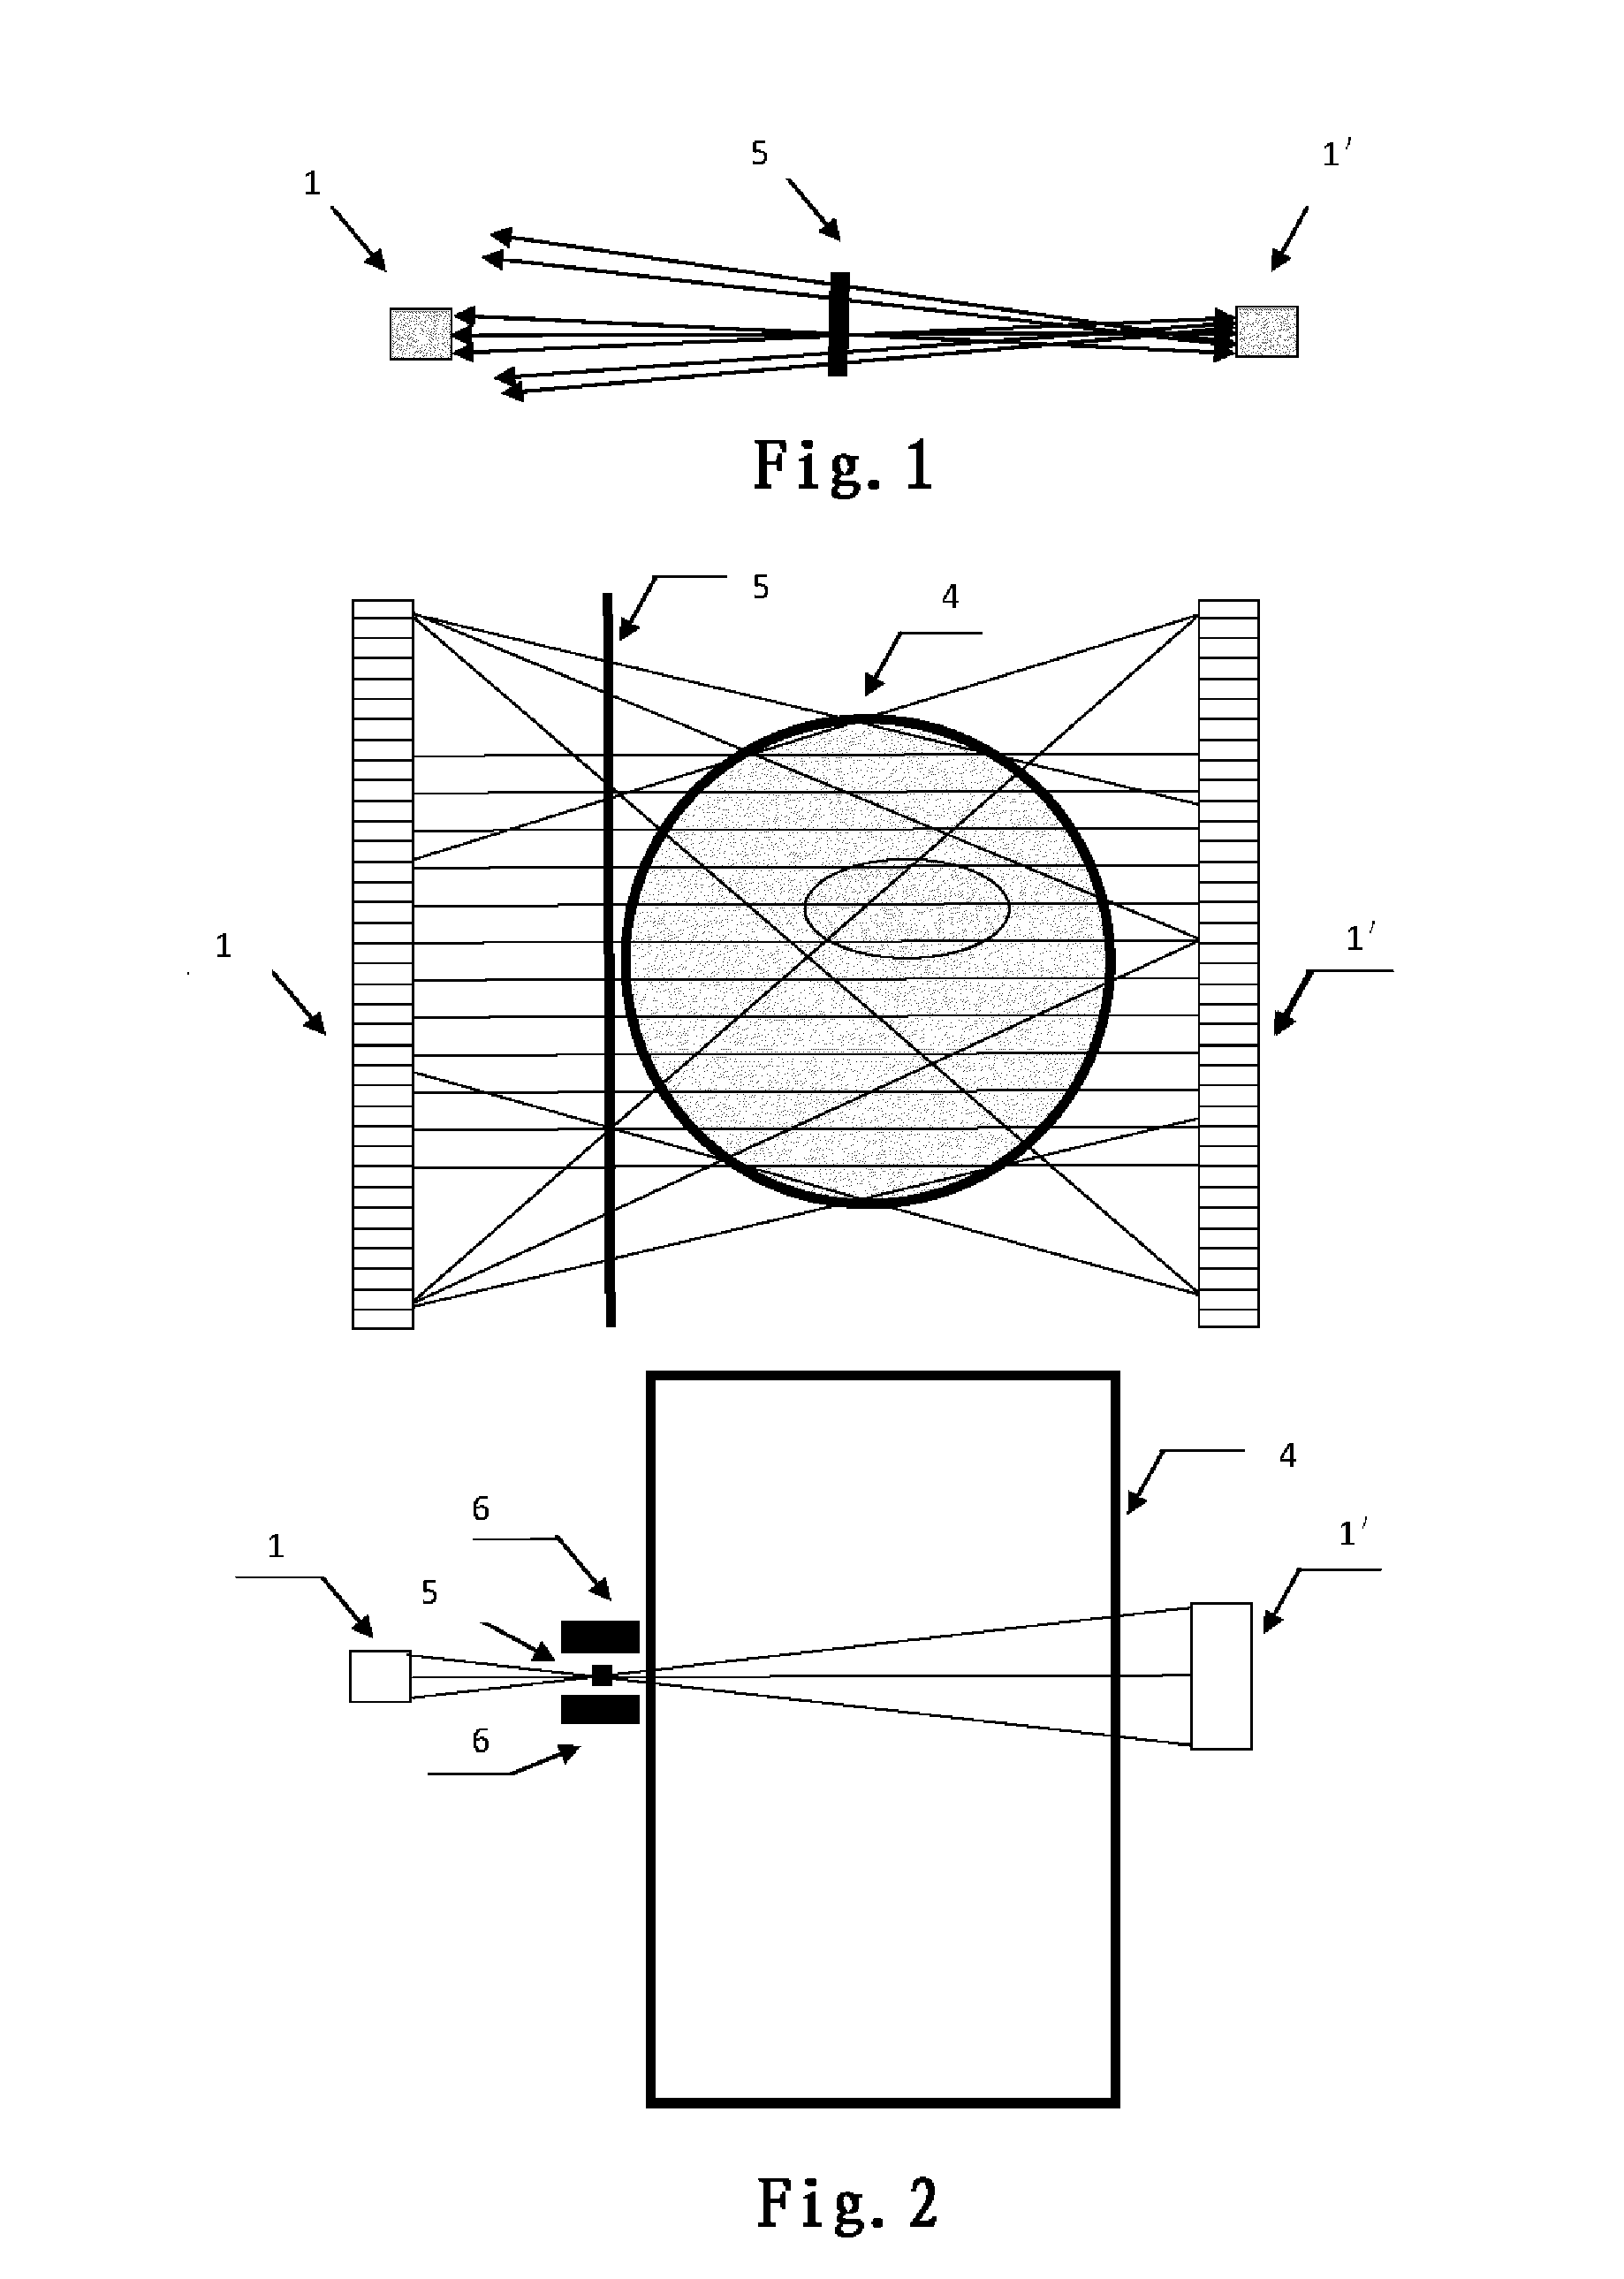 Positron tomography imaging apparatus and method for multiphase flow